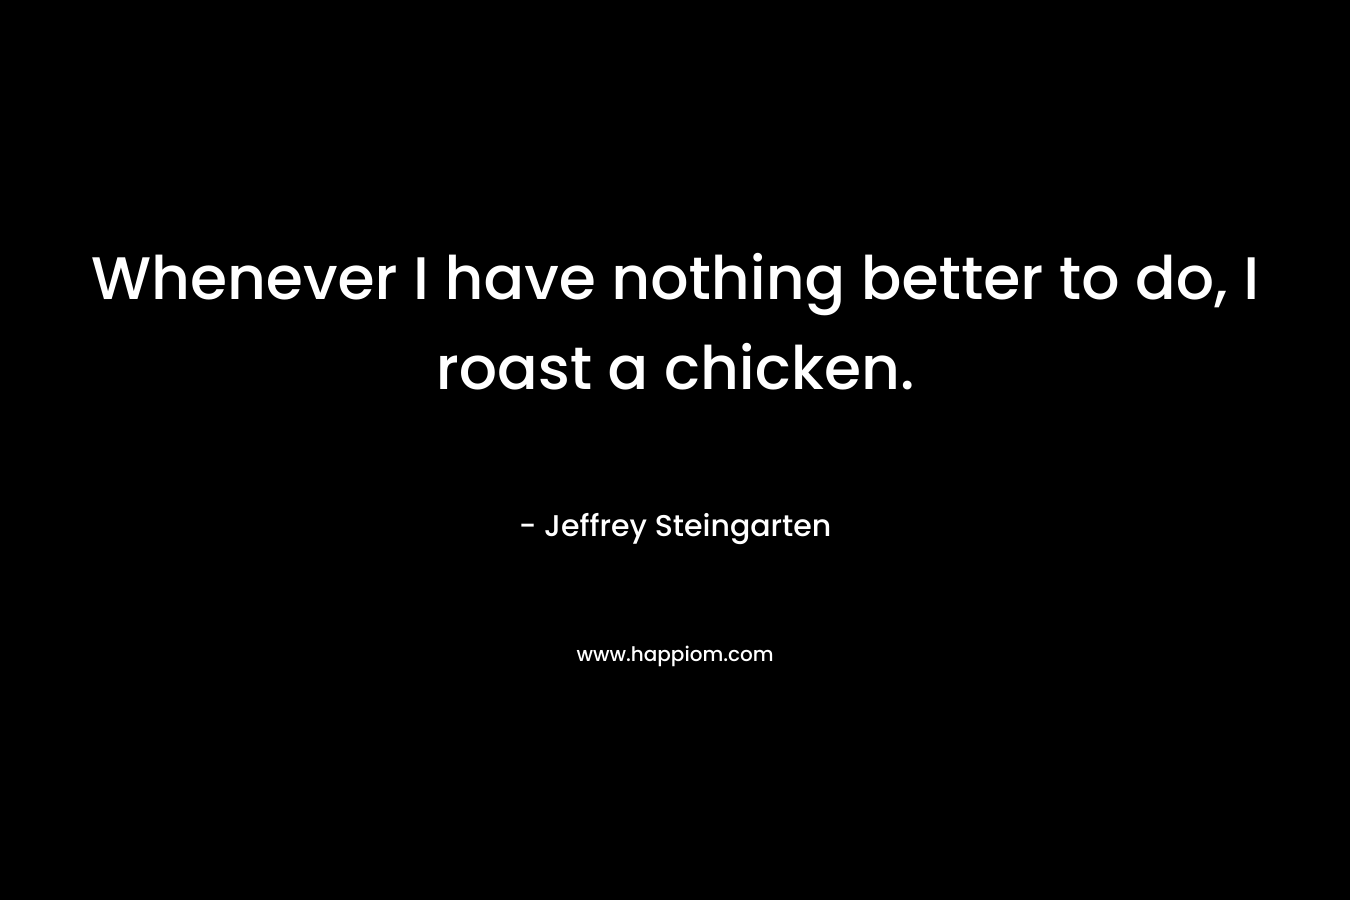 Whenever I have nothing better to do, I roast a chicken. – Jeffrey Steingarten